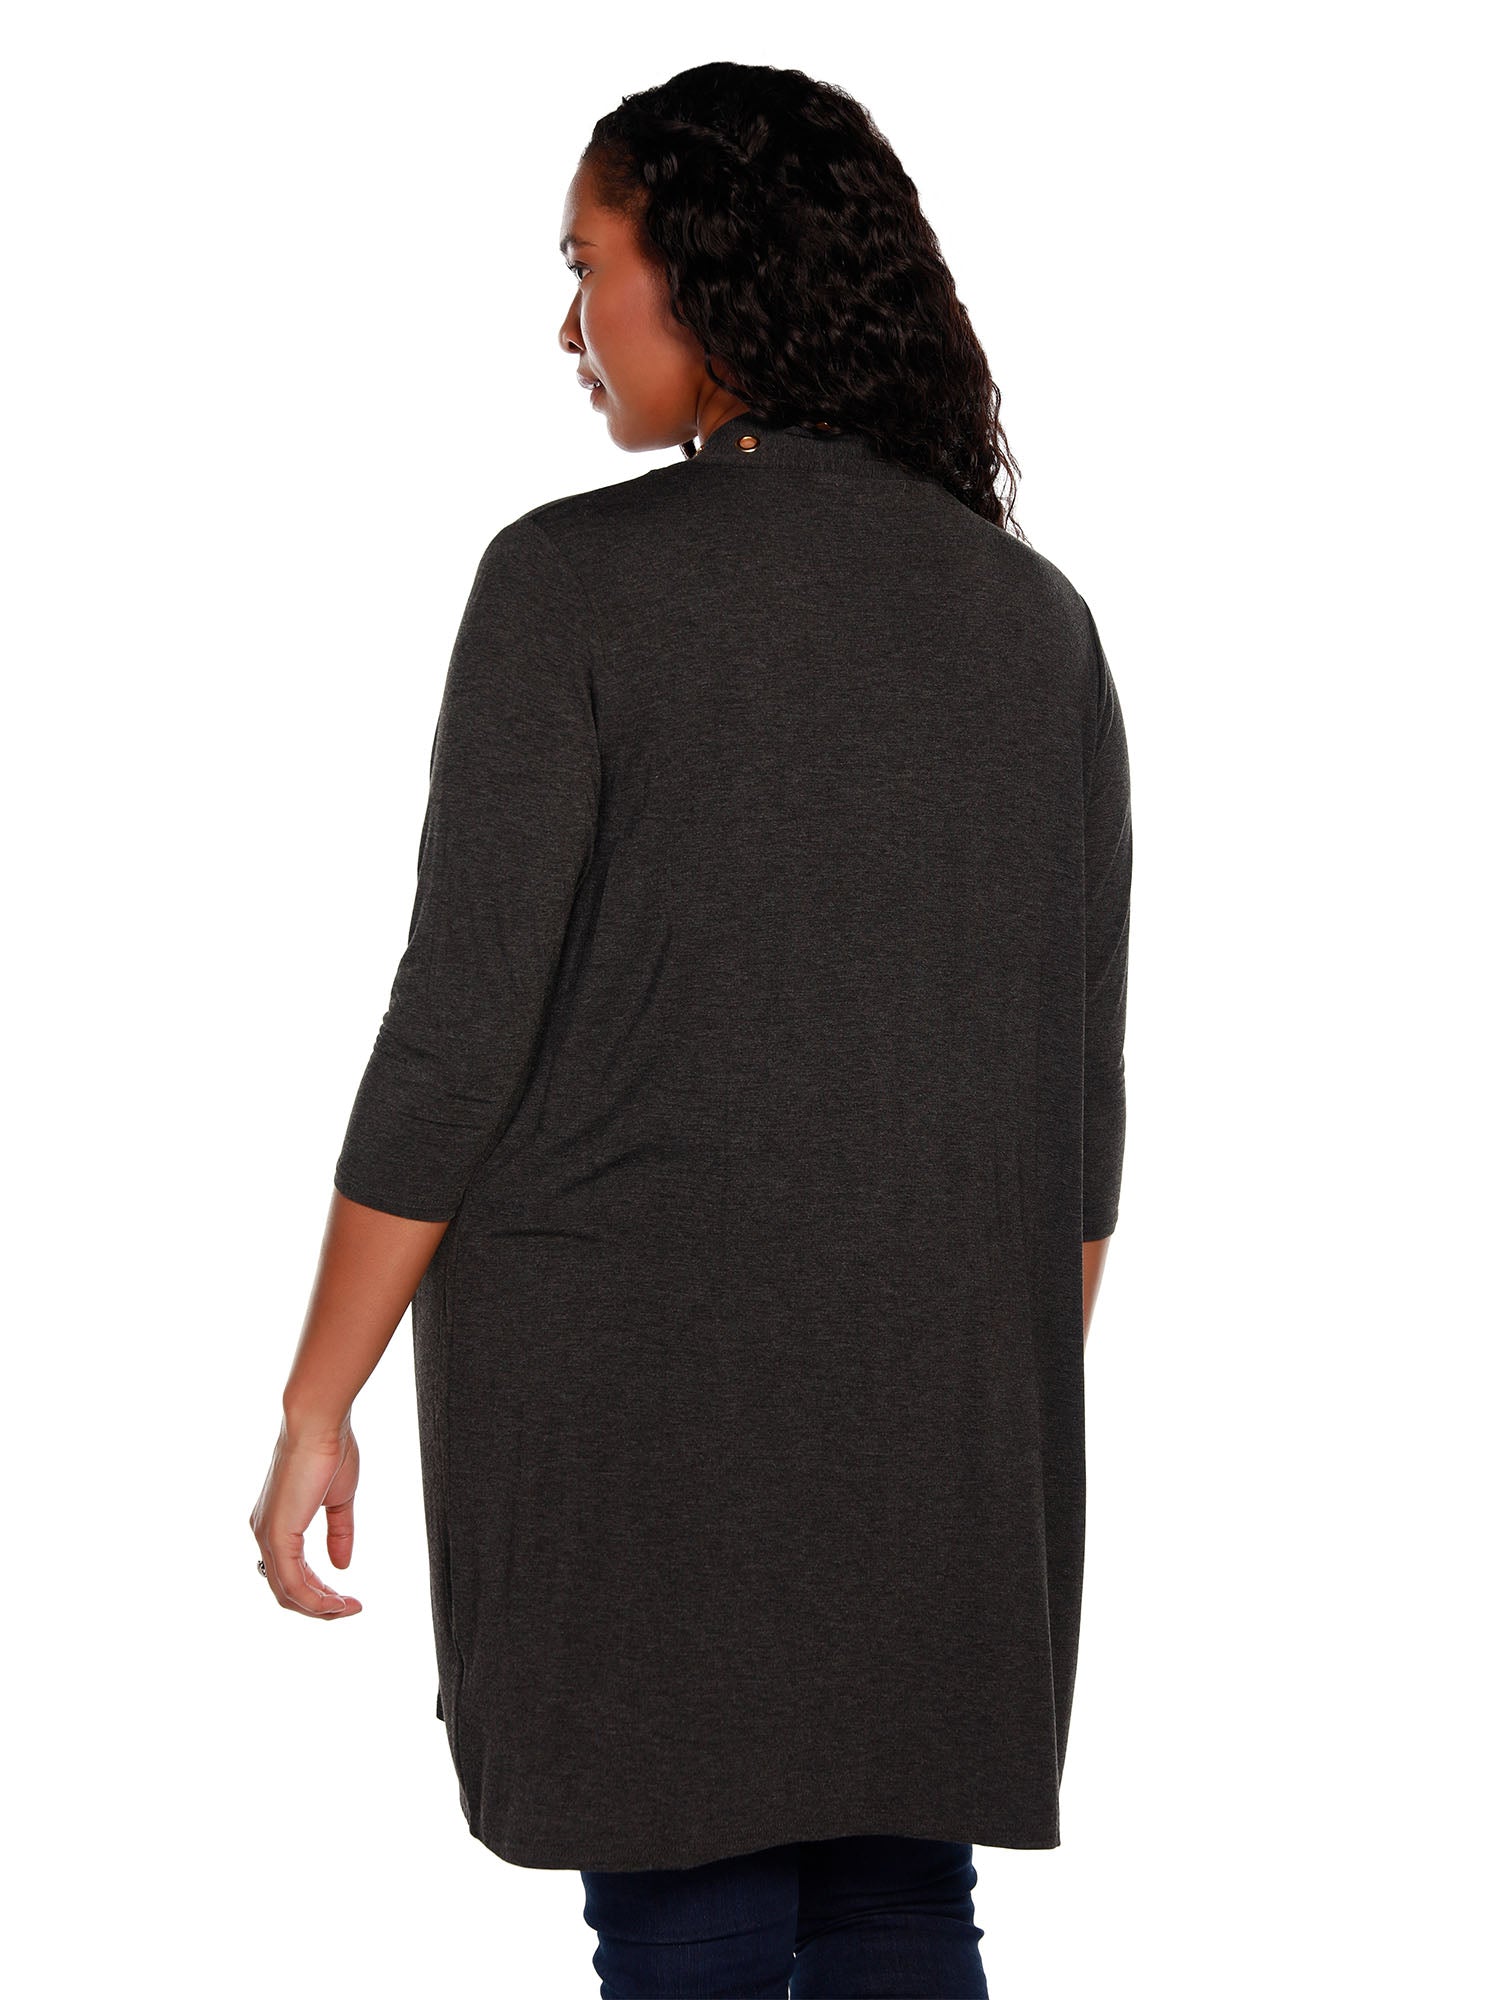 Women's Fashion Cardigan in a Soft Light Knit with 3/4 Sleeves and Grommet Trim | Curvy